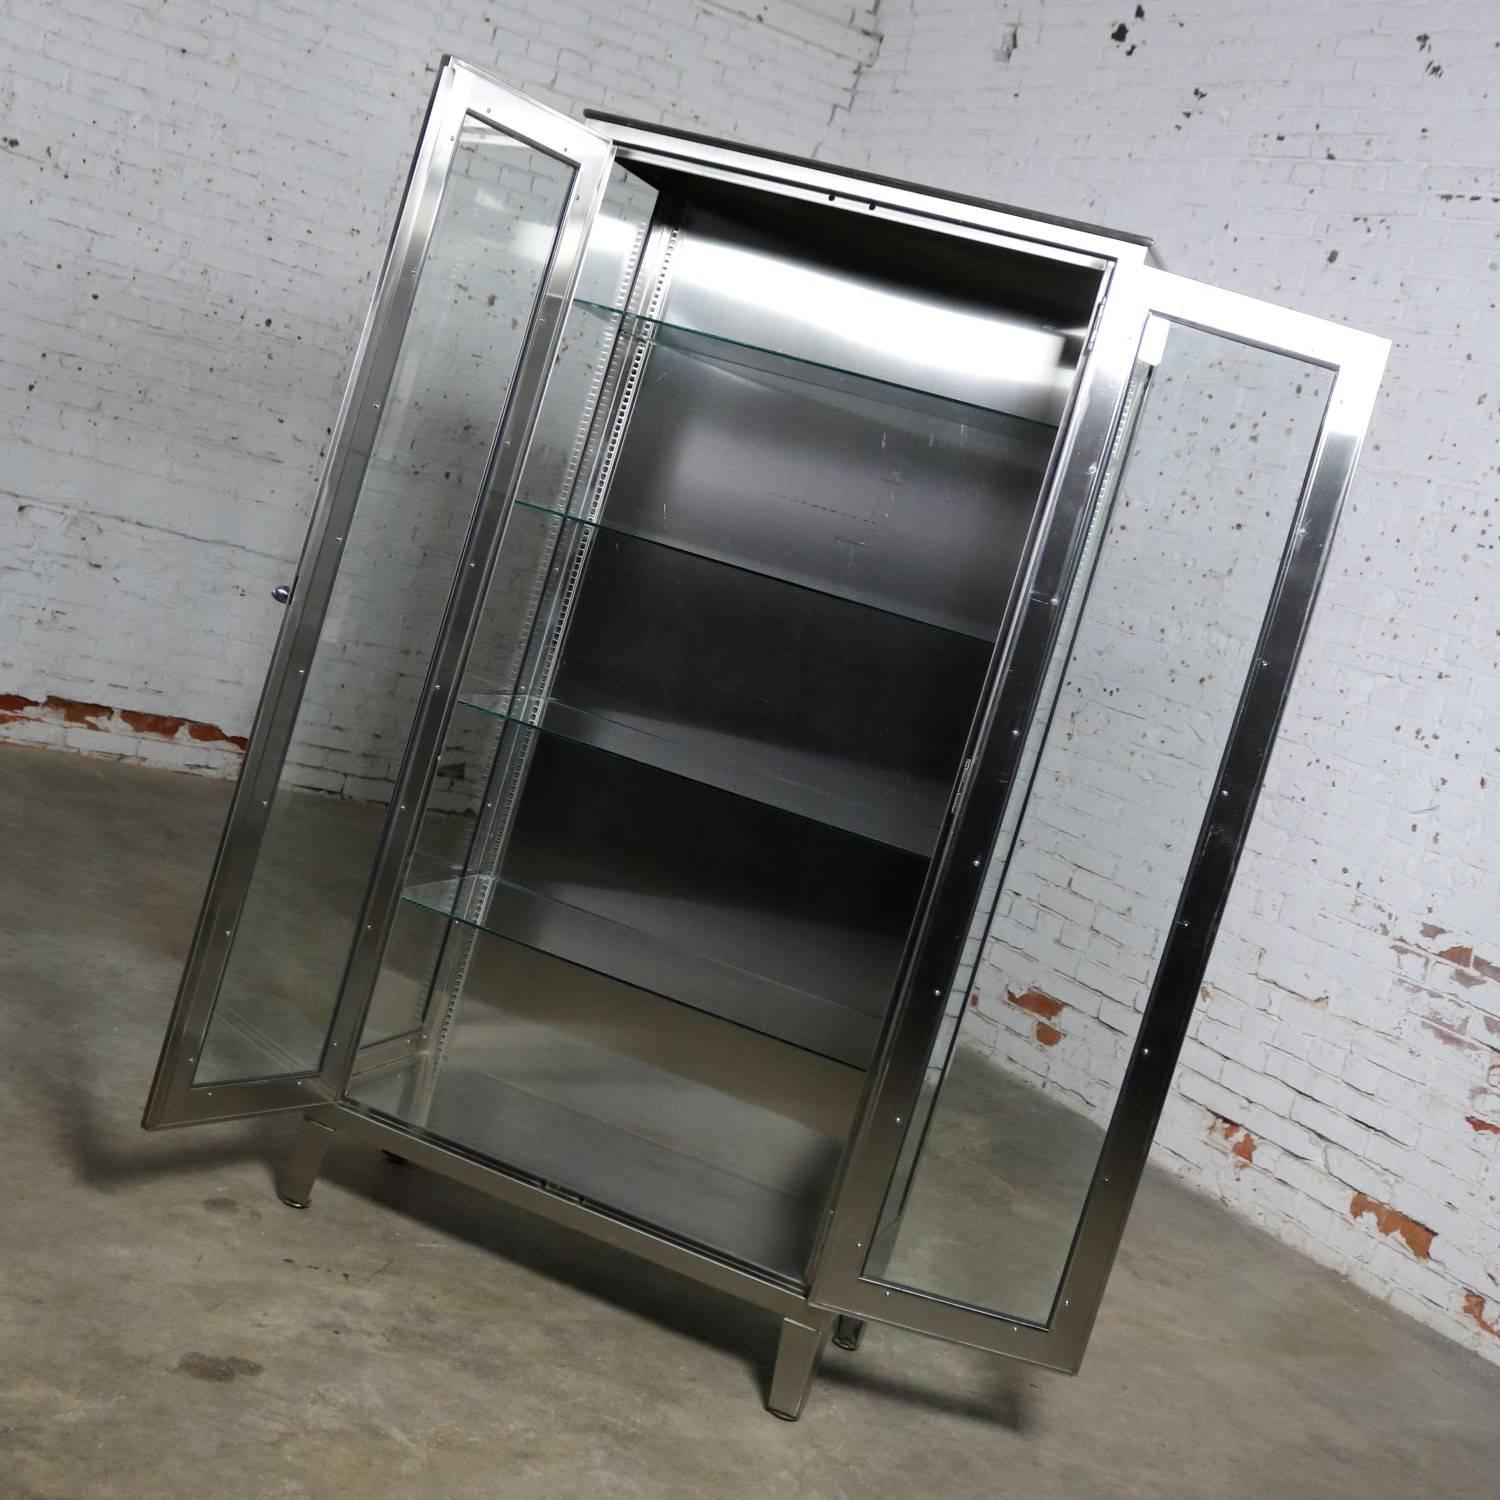 American Vintage Stainless Steel Industrial Display Apothecary Medical Cabinet Glass Door